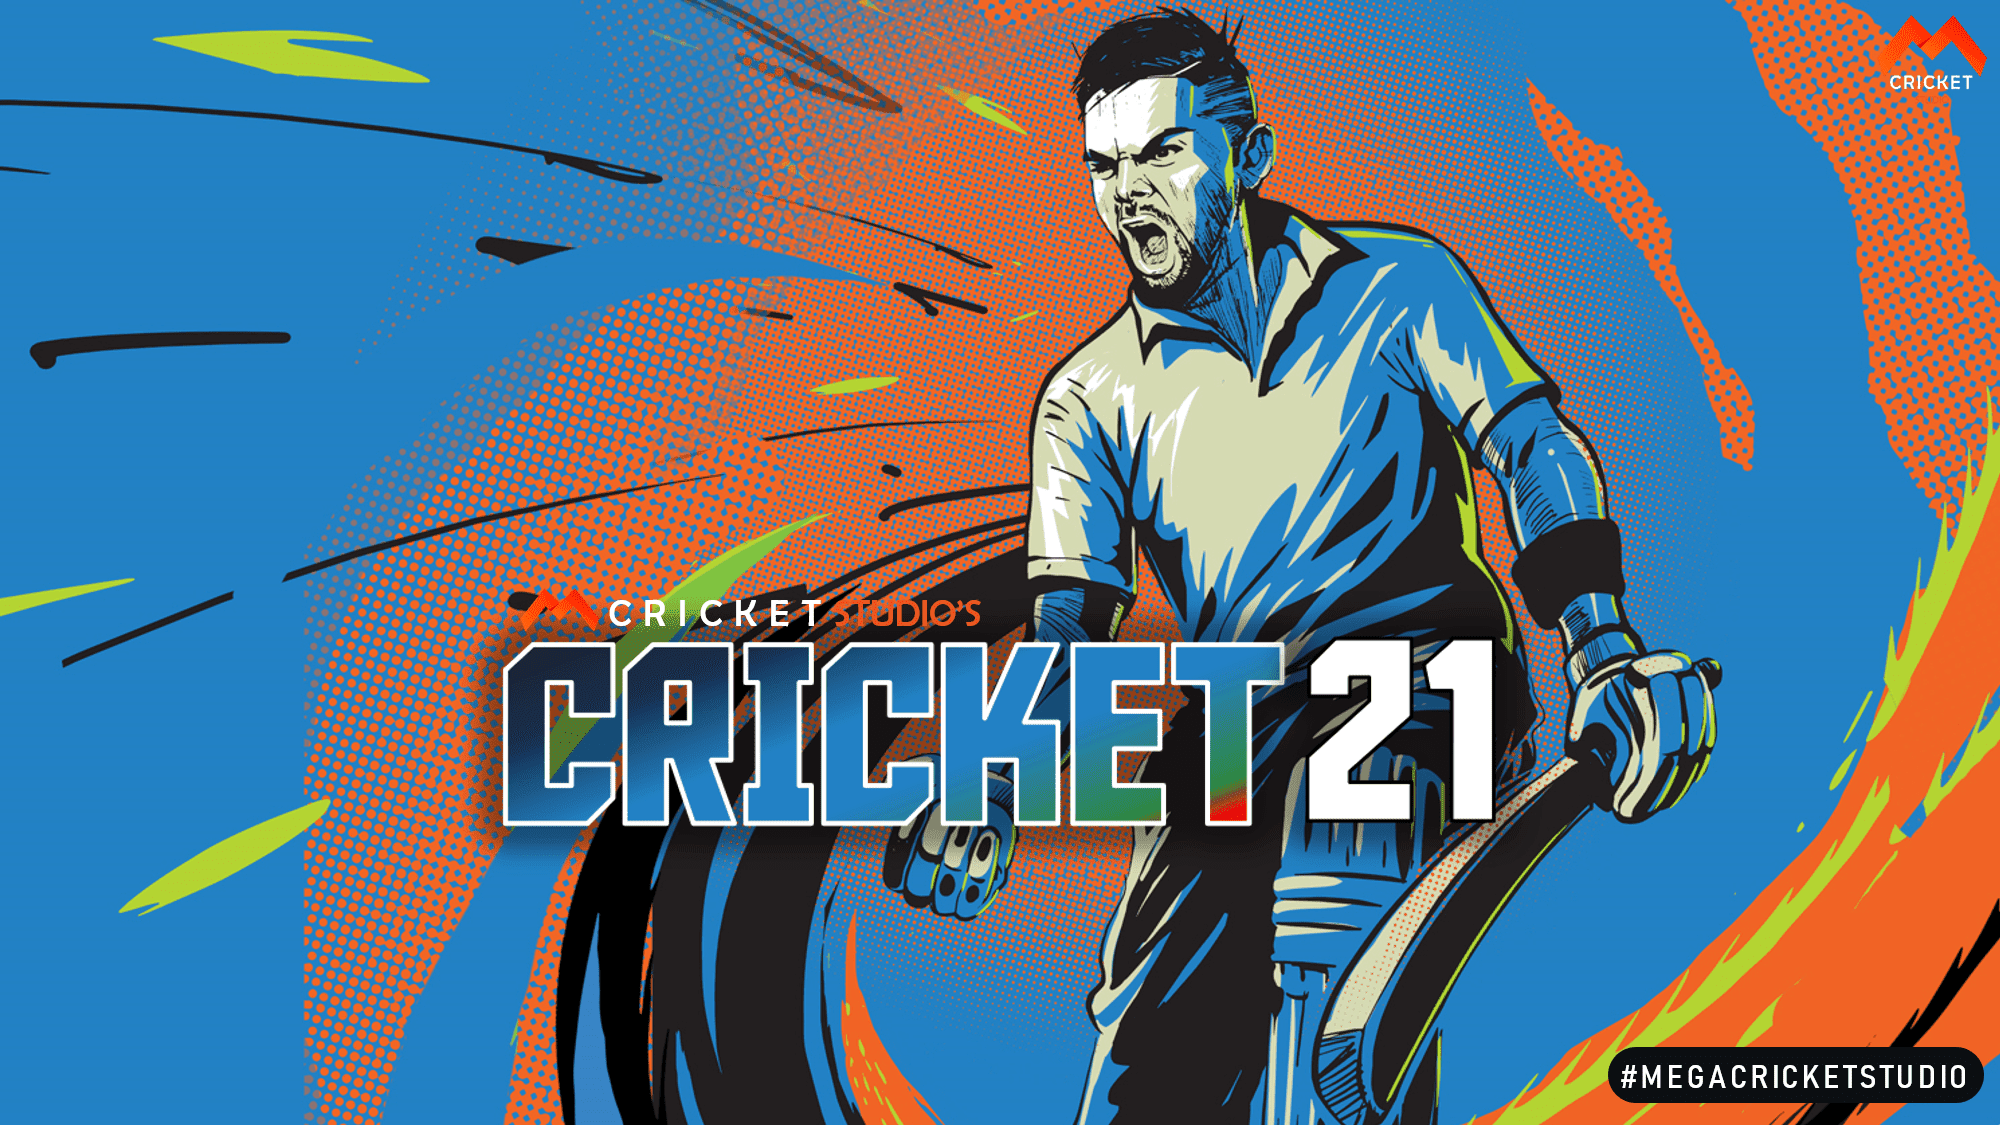 ea sports cricket 11 patch download